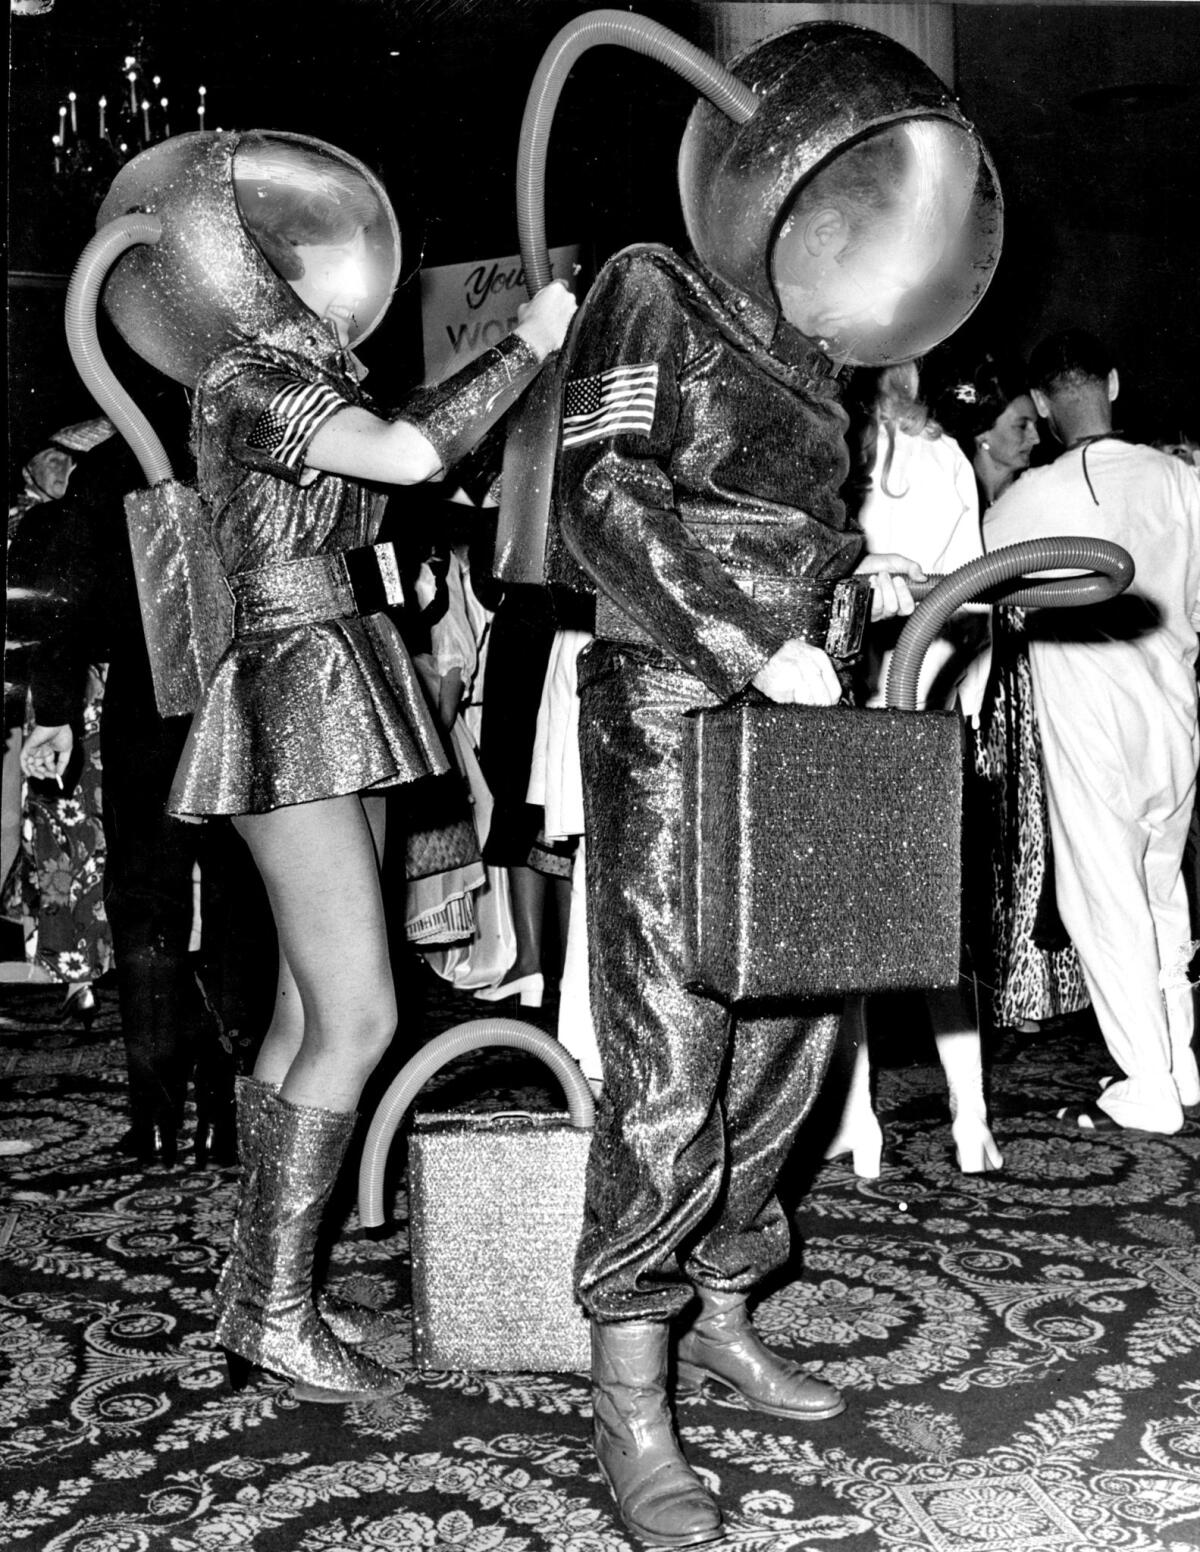 Linda Redeker and George Trammell III are dressed as astronauts at the 1971 Bachelors Ball.